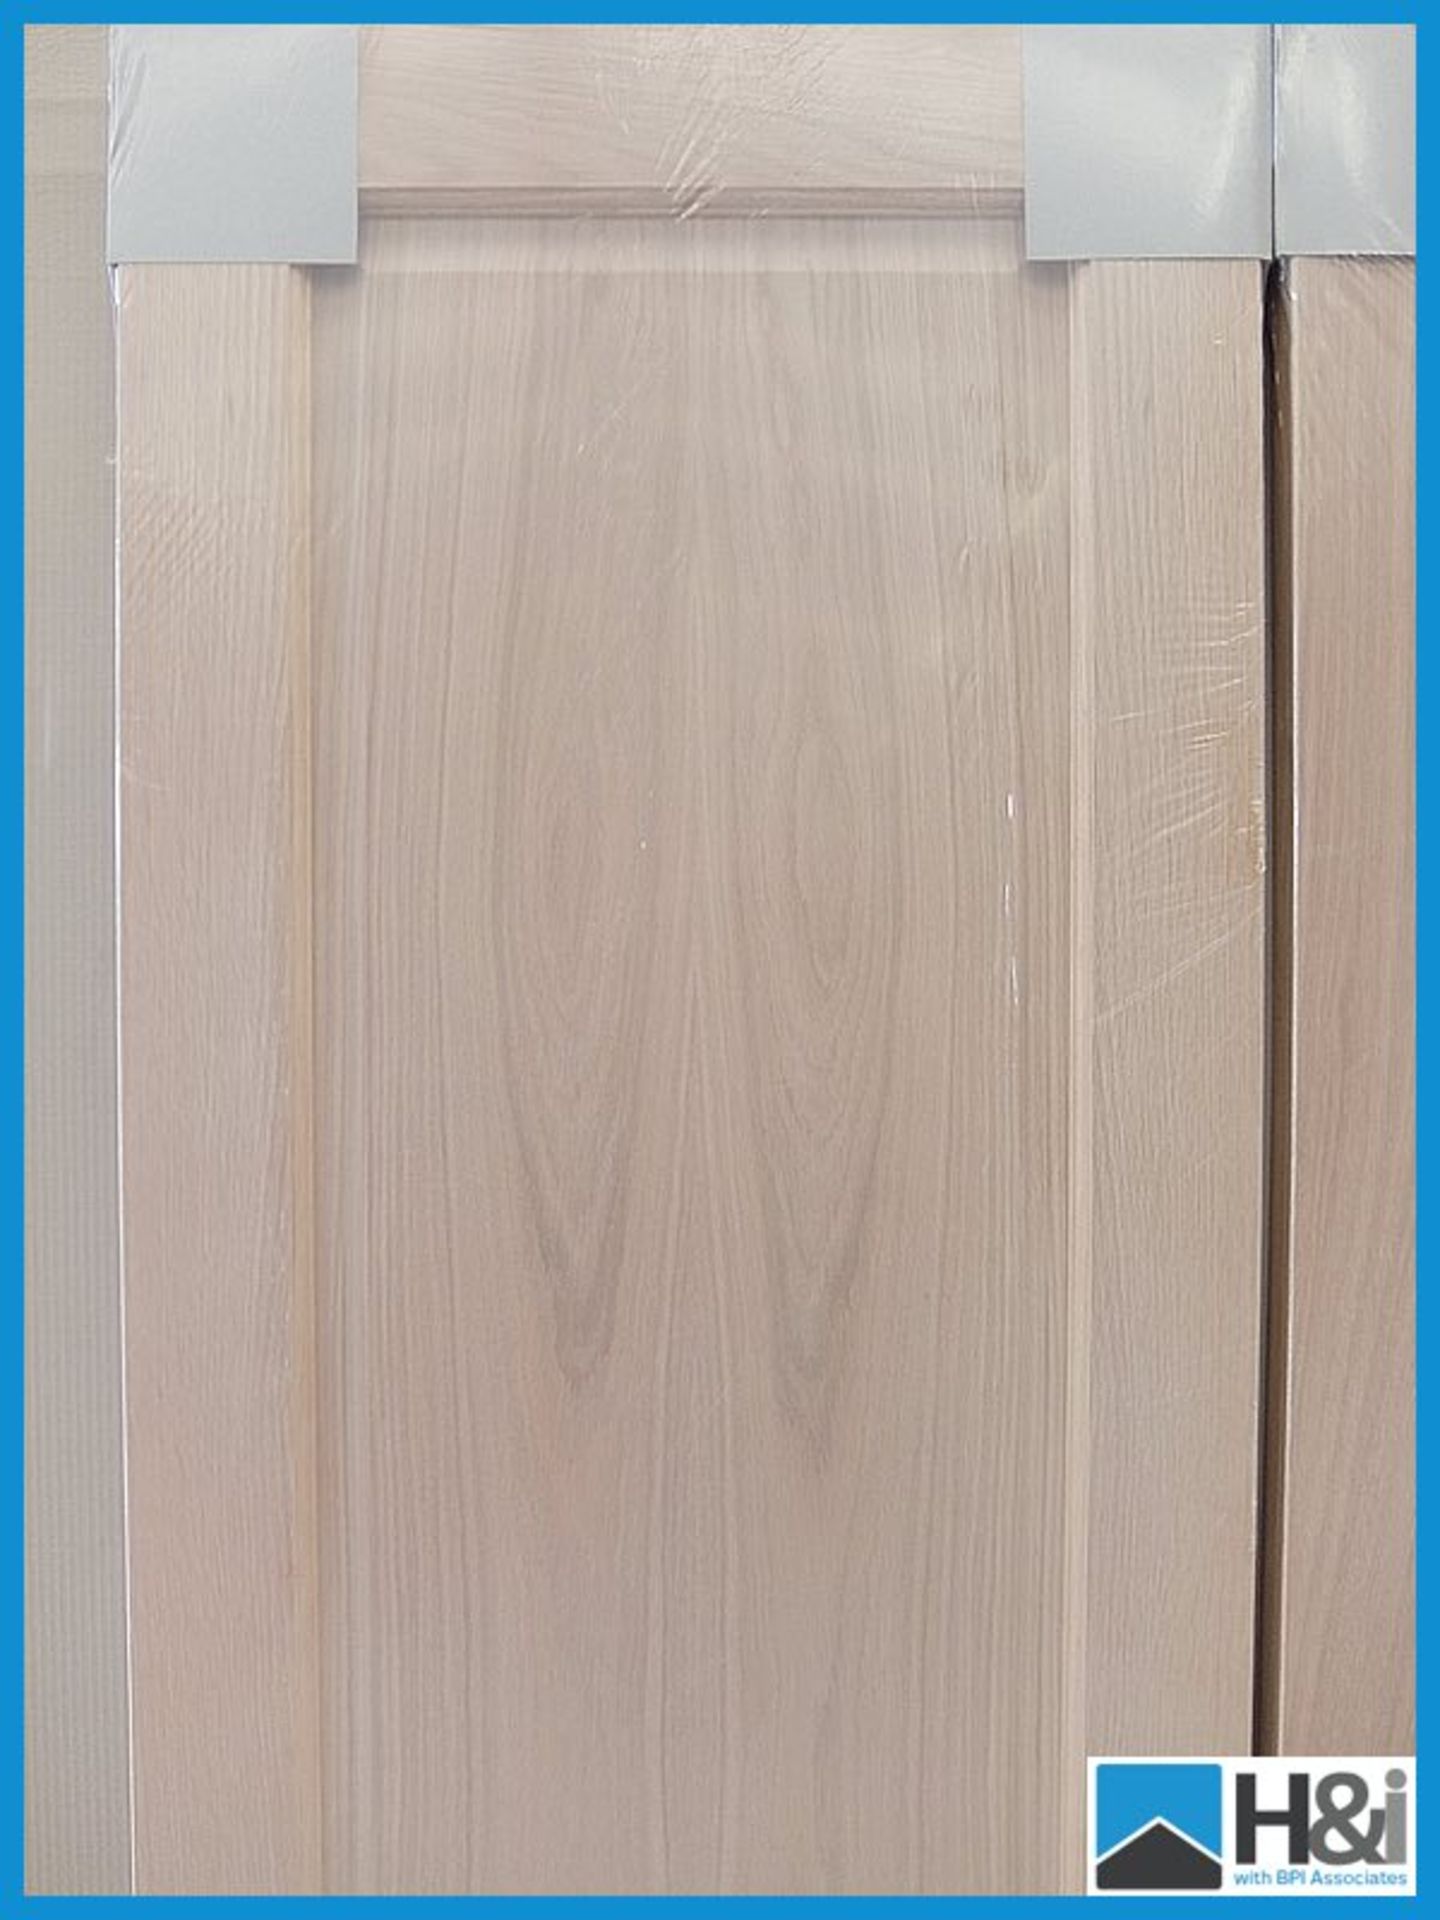 2ft 9in Kielder oak internal door, 35mm thick. 78in x 33in. Raised and fielded panel. Unfinished for - Image 2 of 2